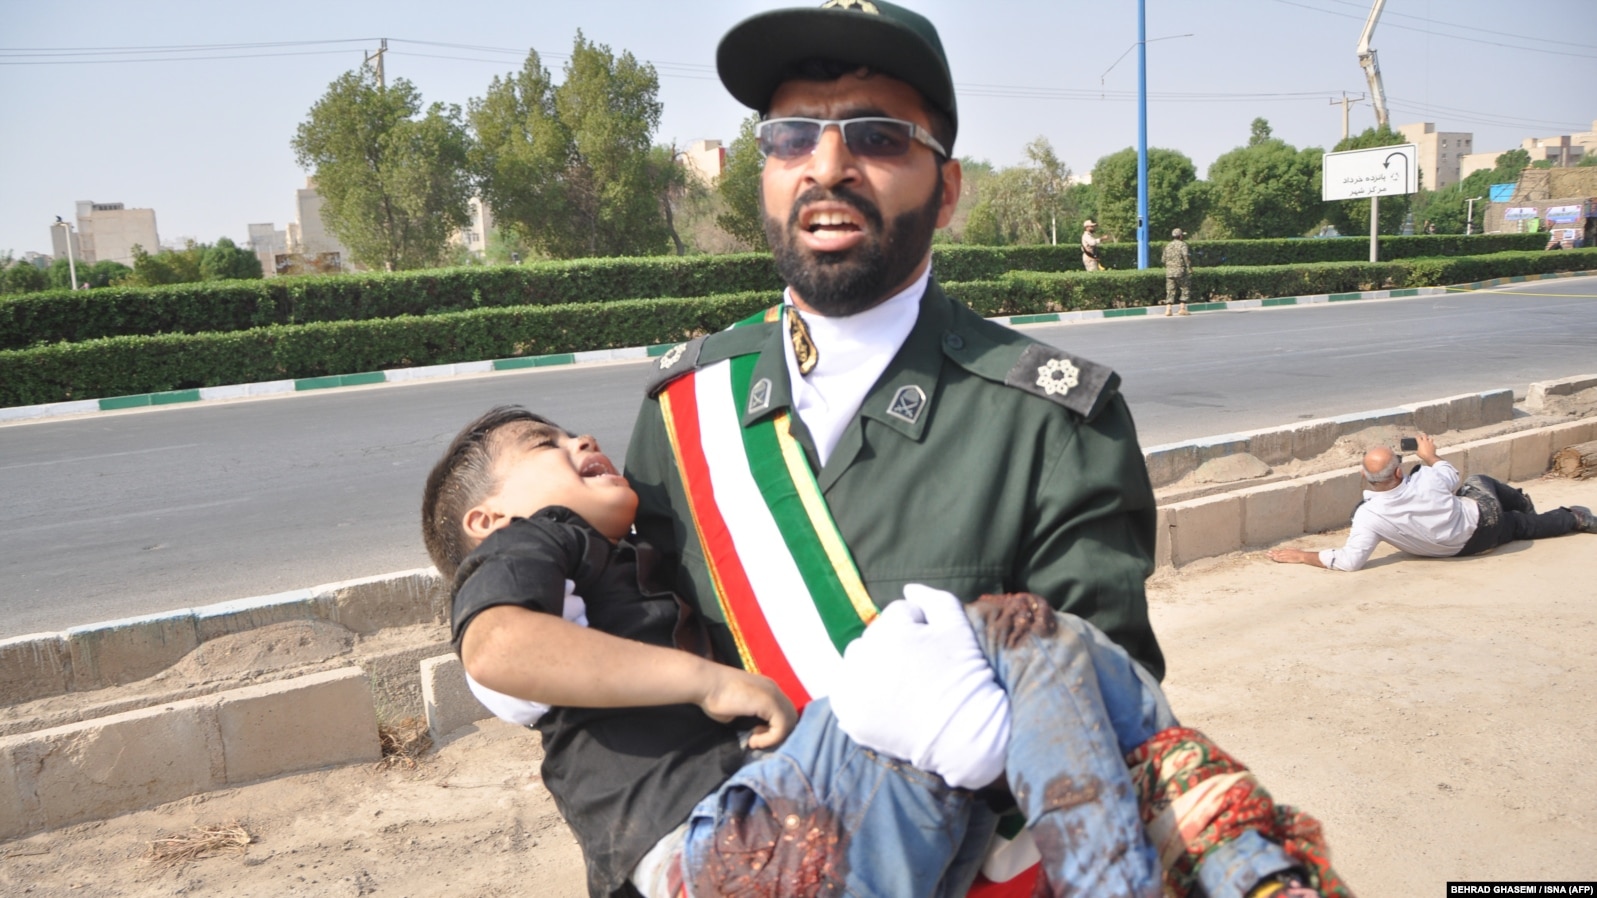 September 22, 2018 in the southwestern Iranian city of Ahvaz shows a member of Iran's Revolutionary Guards Corps (IRGC) carrying an injured child at the scene of an attack on a military parade. Ahvaz Iran